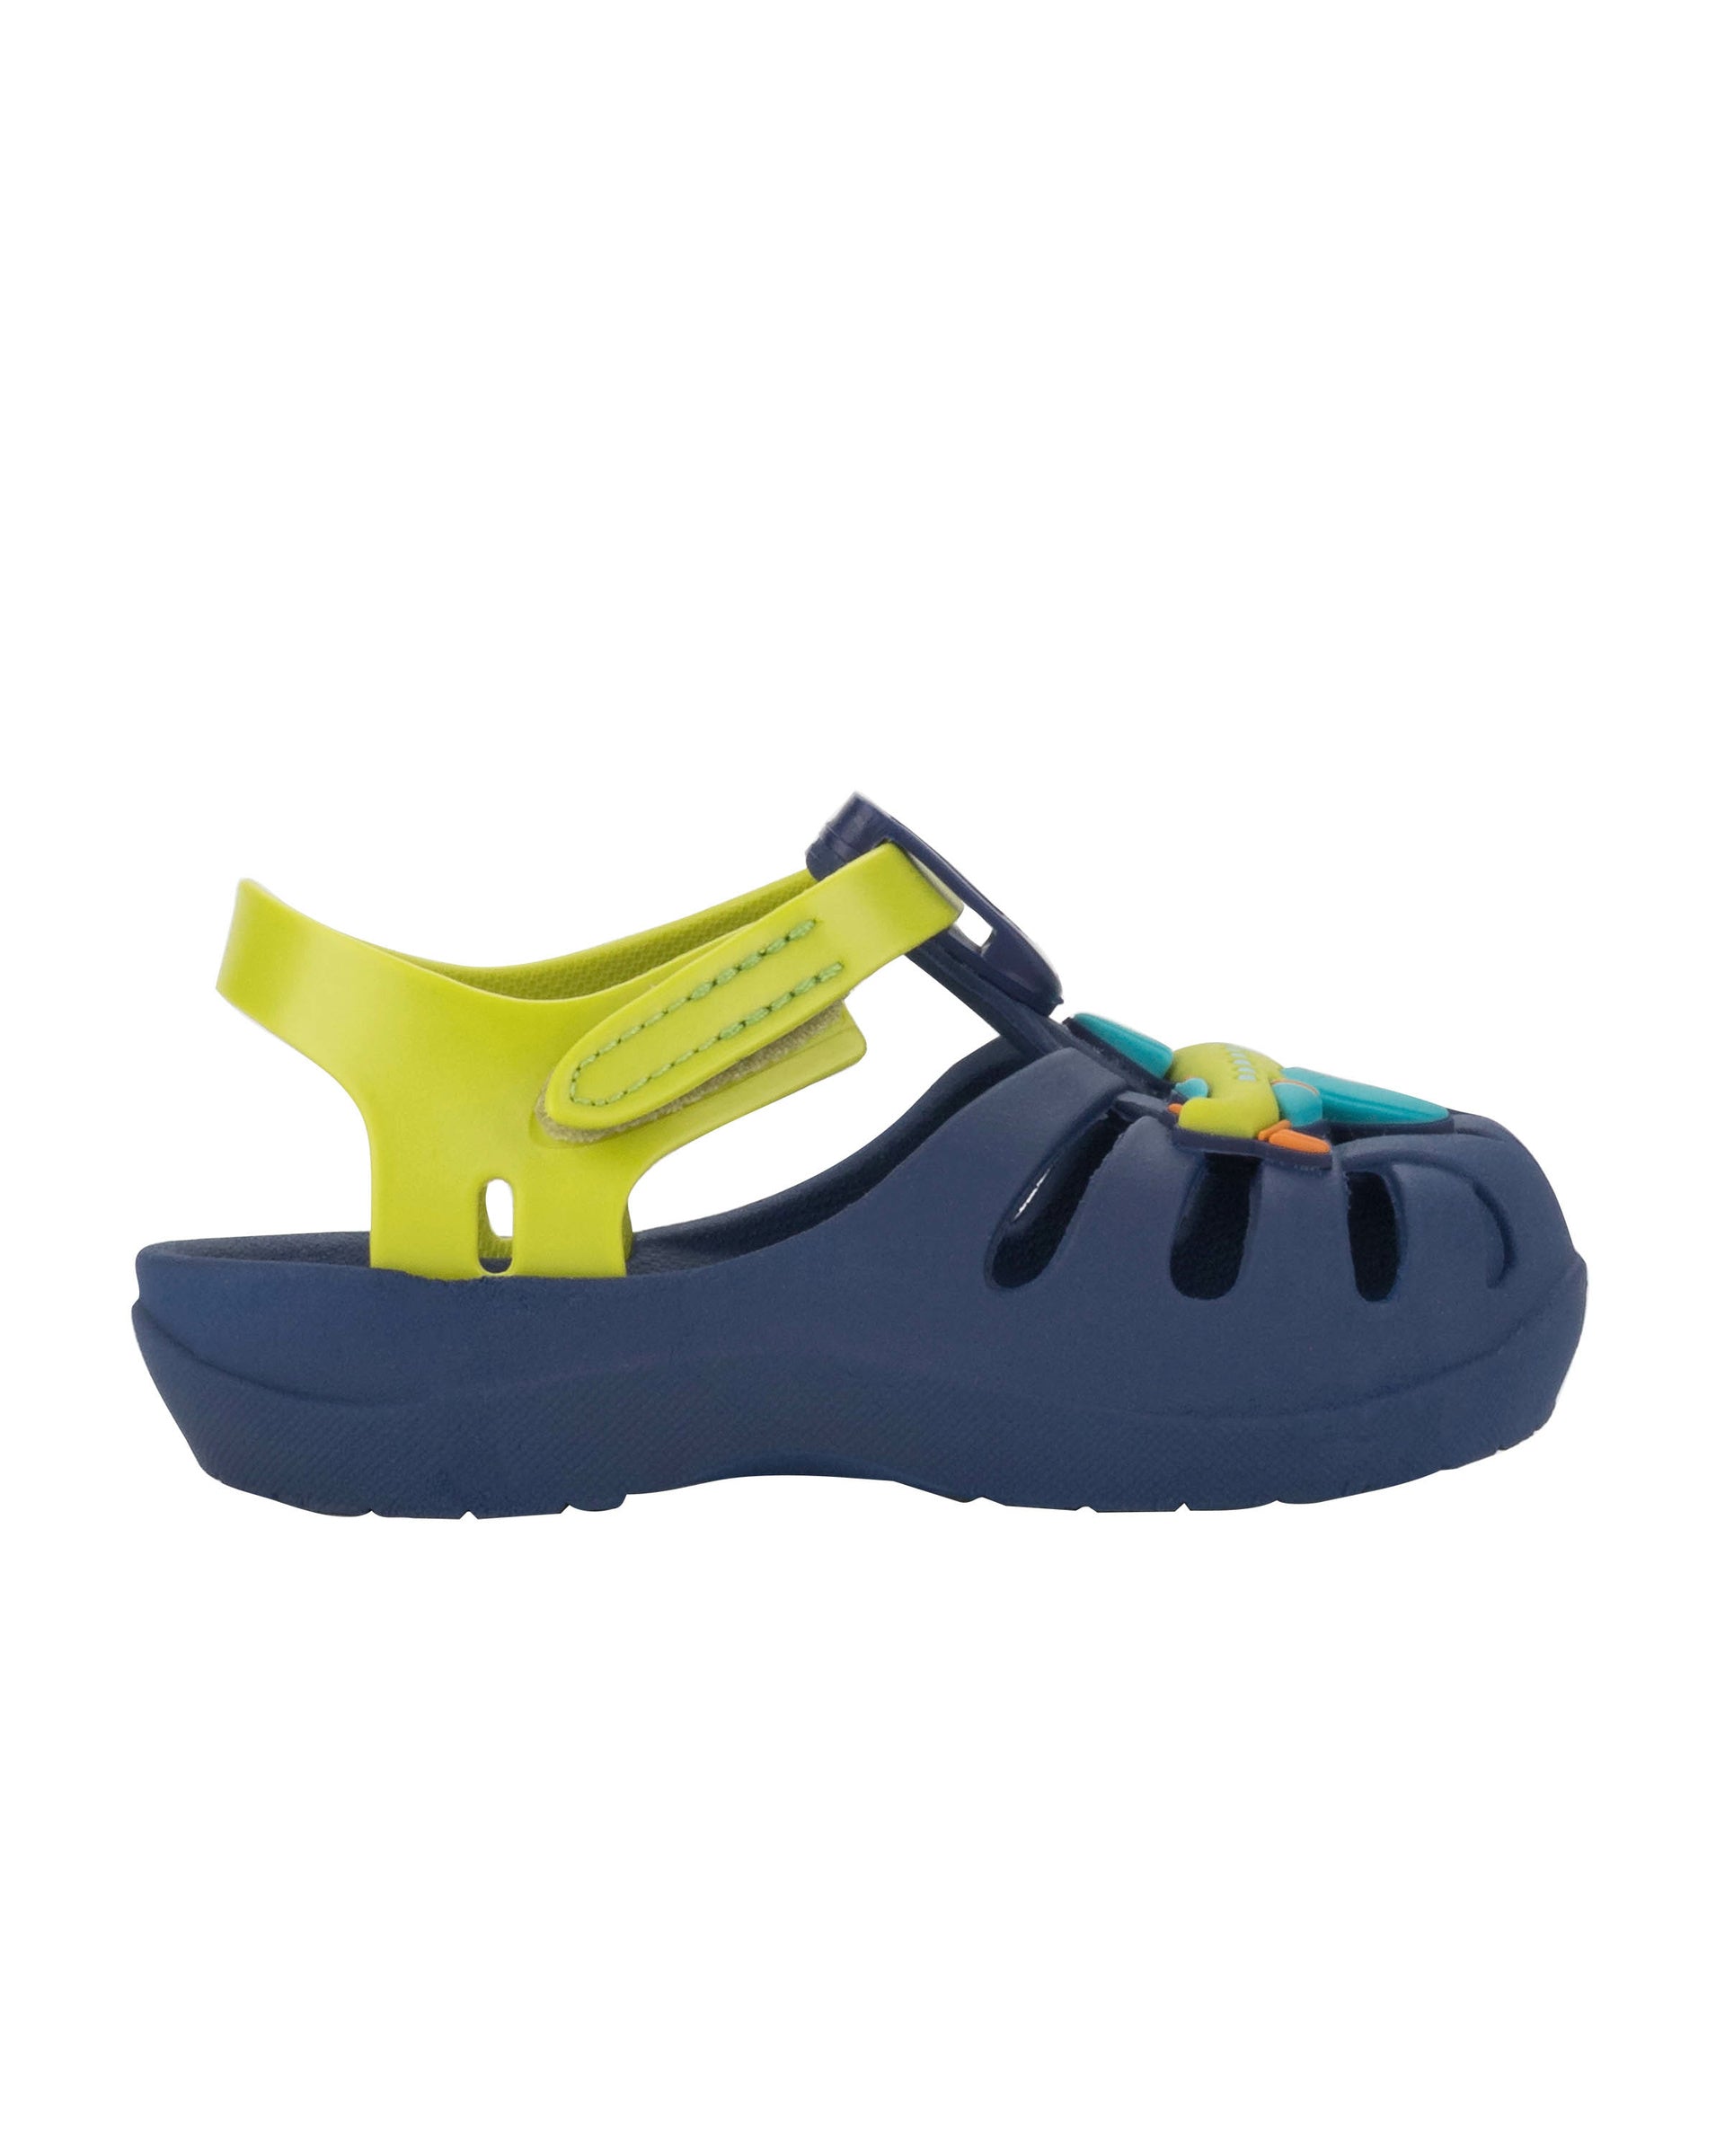 Outer side view of a blue Ipanema Summer baby sandal with airplane on the upper and a green strap.